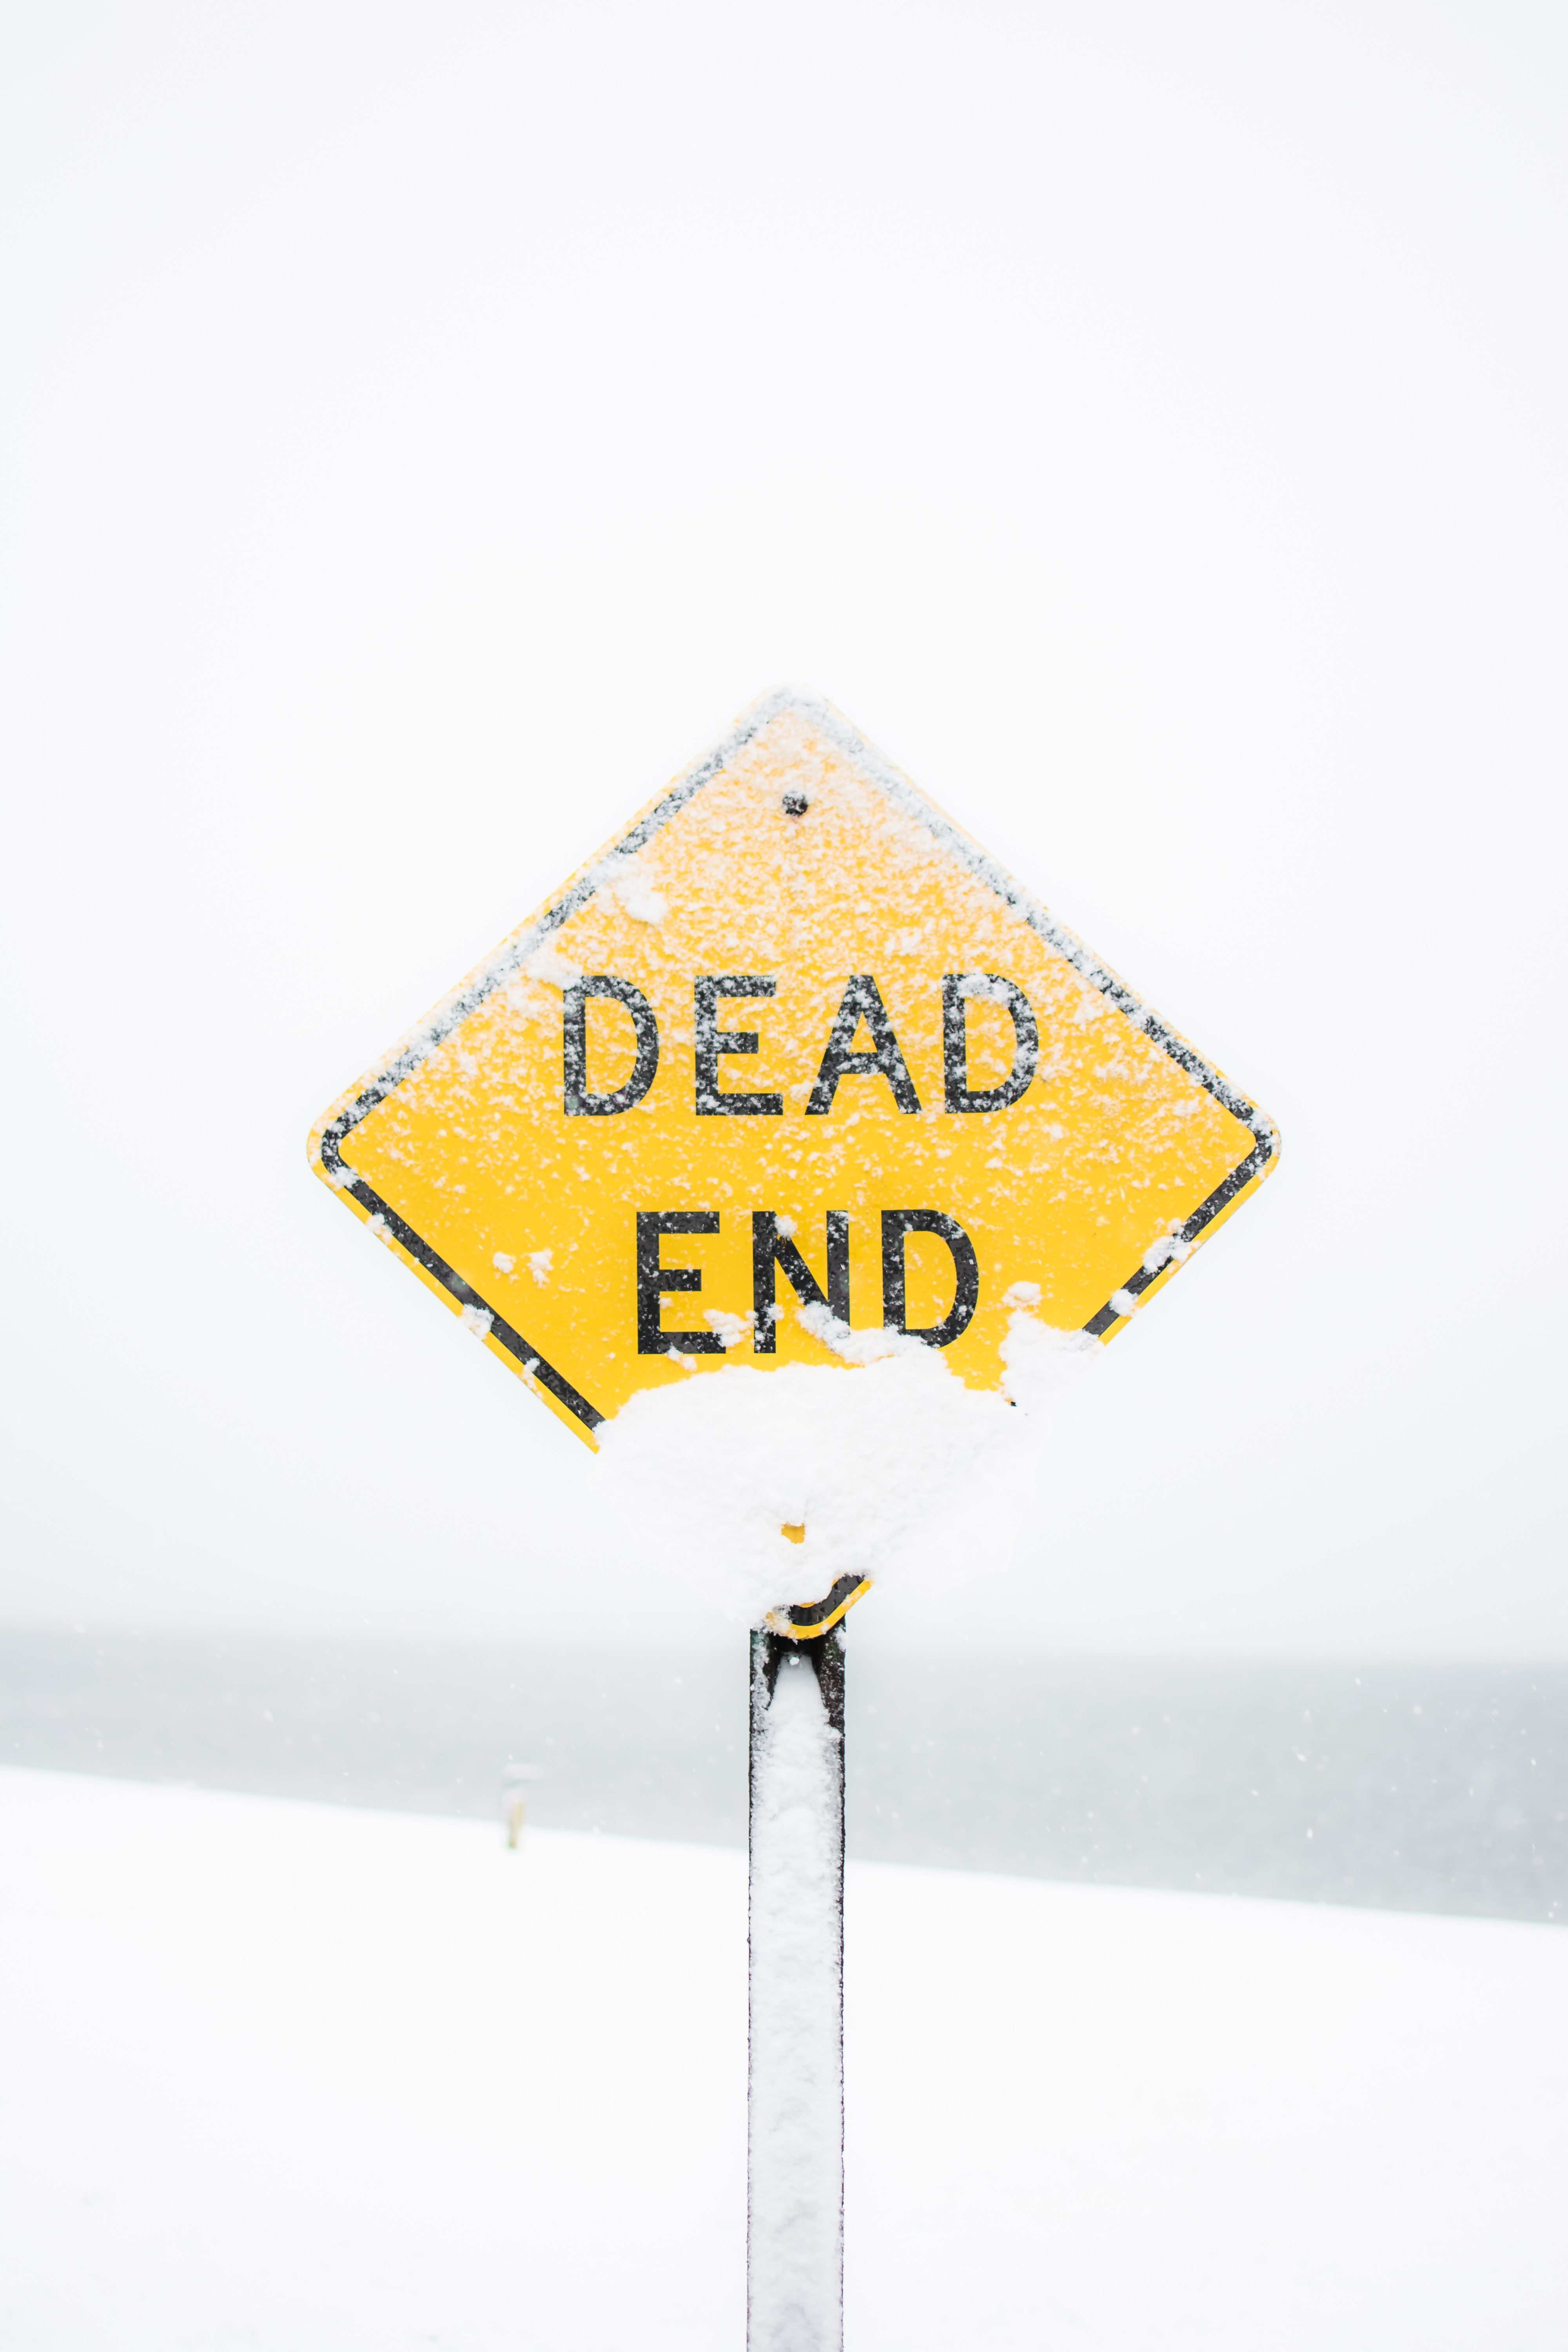 USA Photography White Warning Signs Signs Snow Snowing Winter Yellow Triangle Minimalism Simple Back 4000x6000